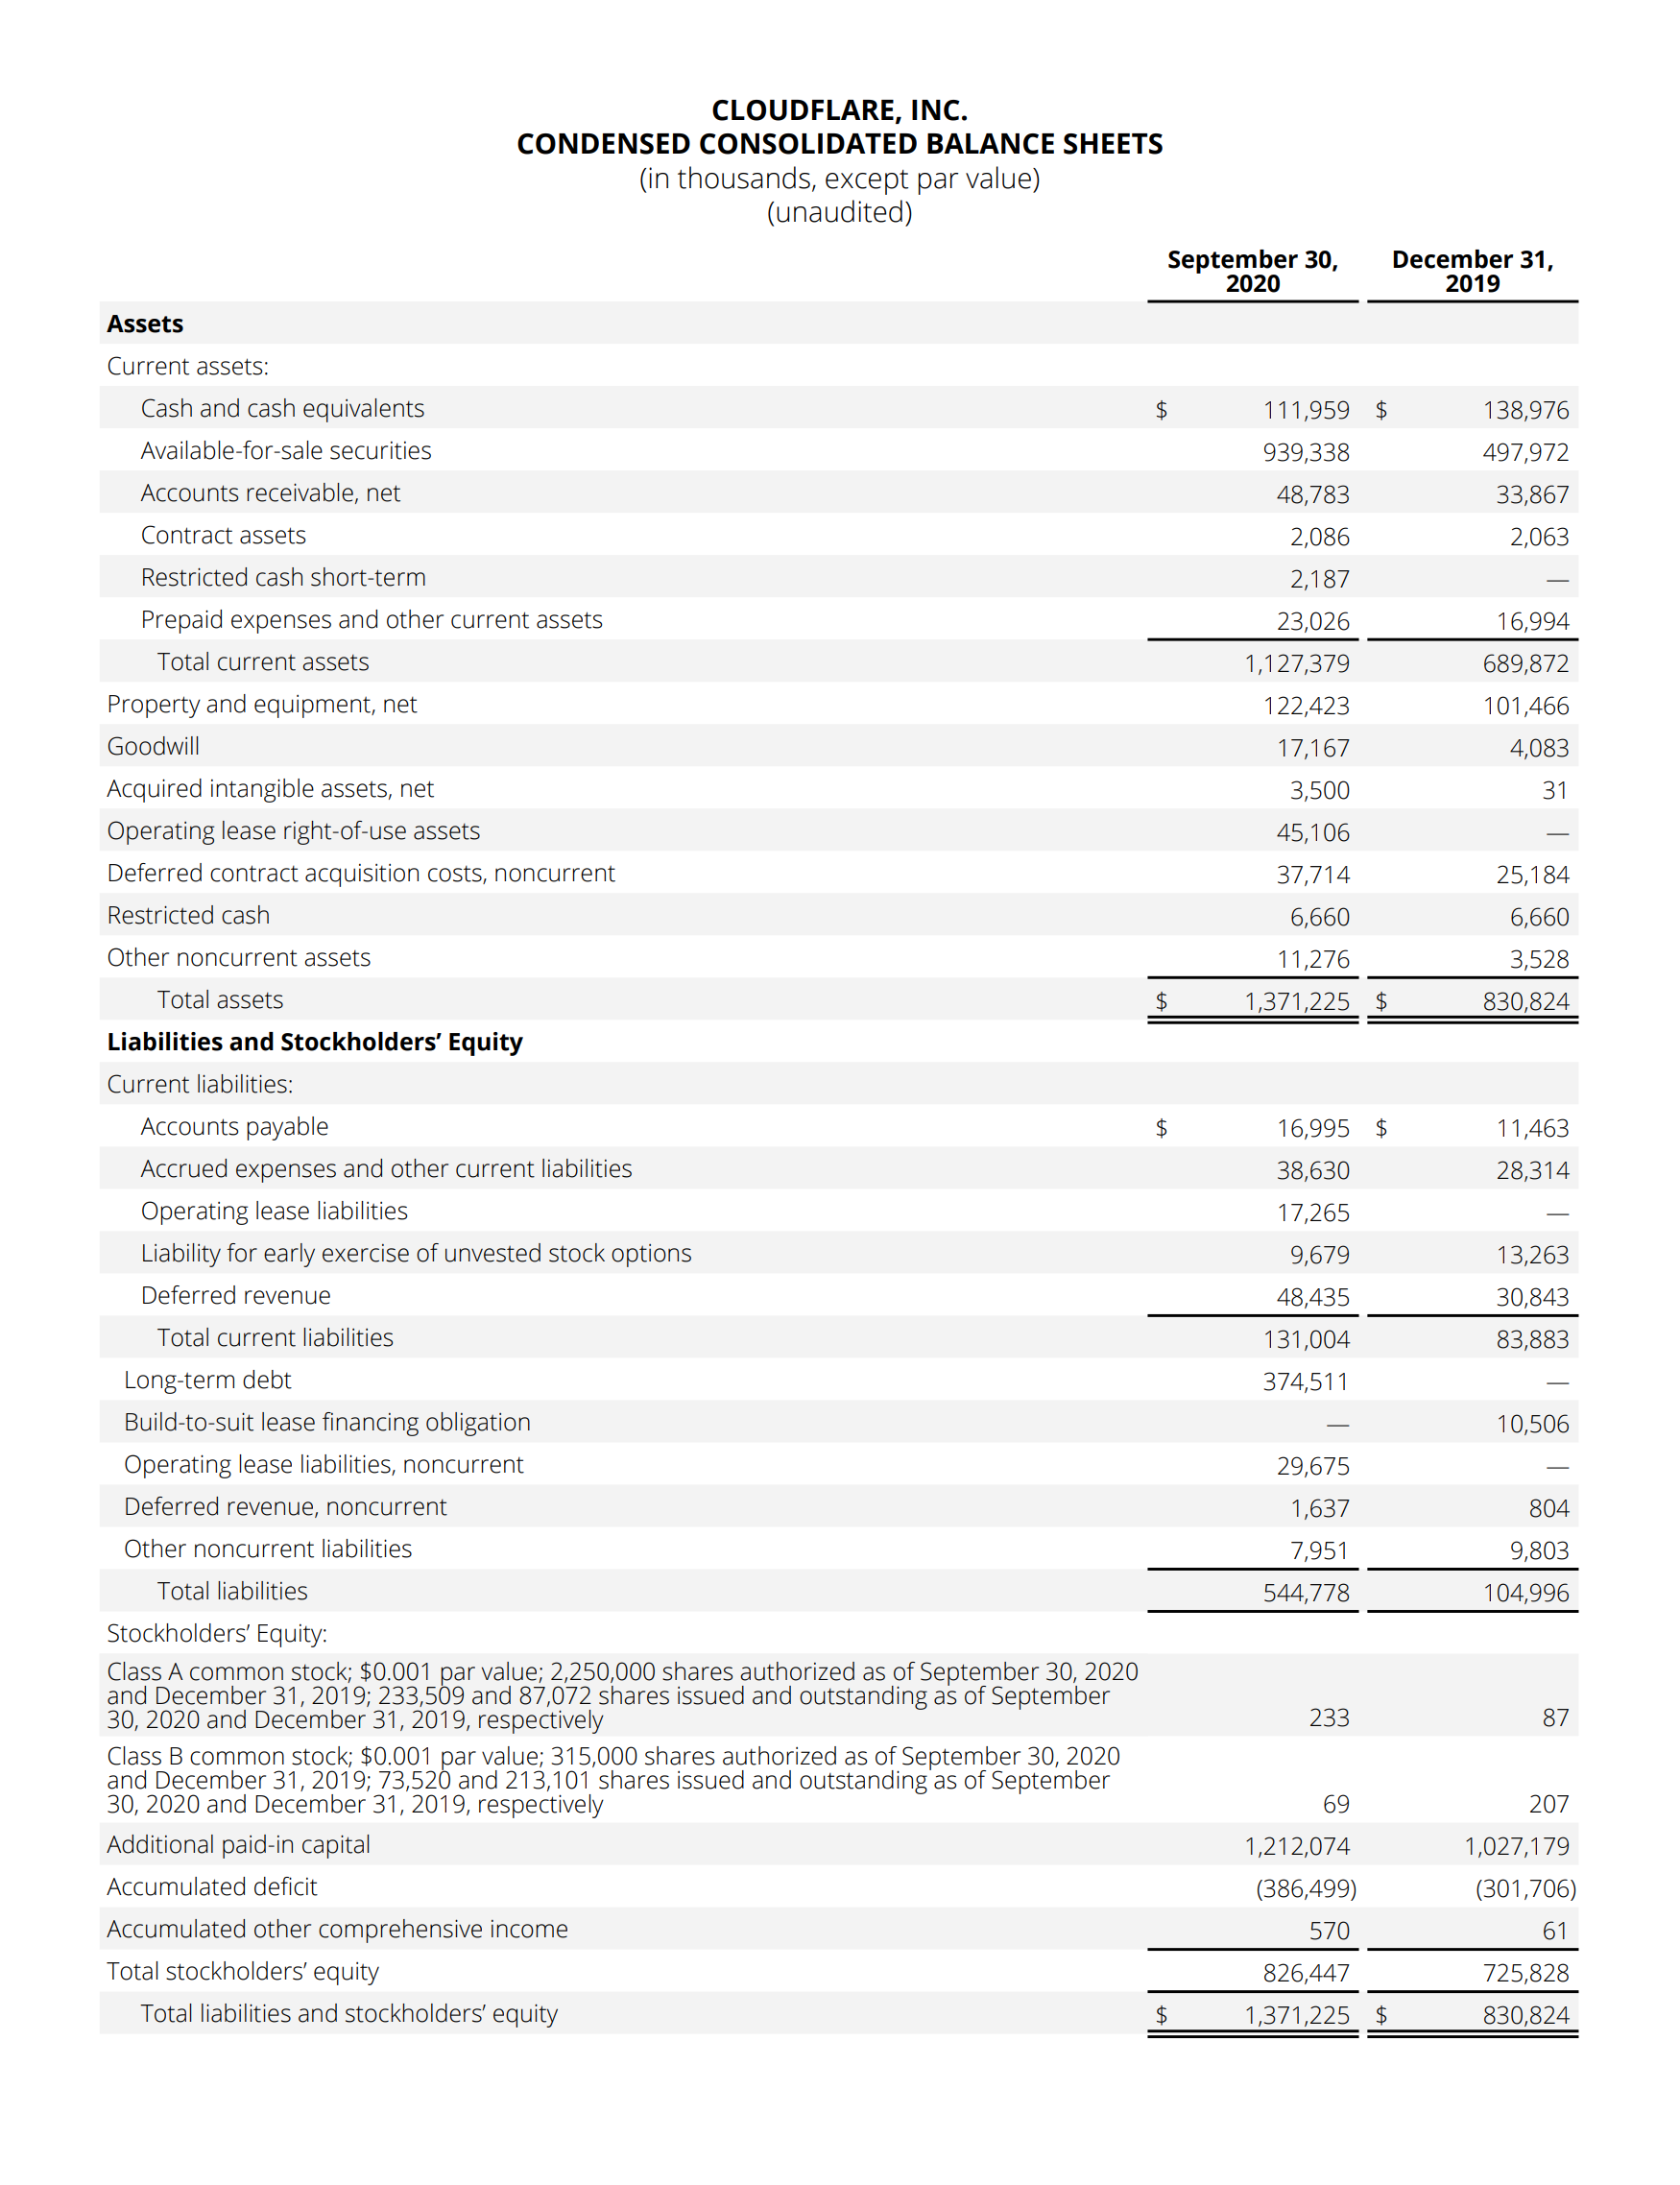 Cloudflare Inc Condensed Consolidated Balance Sheets